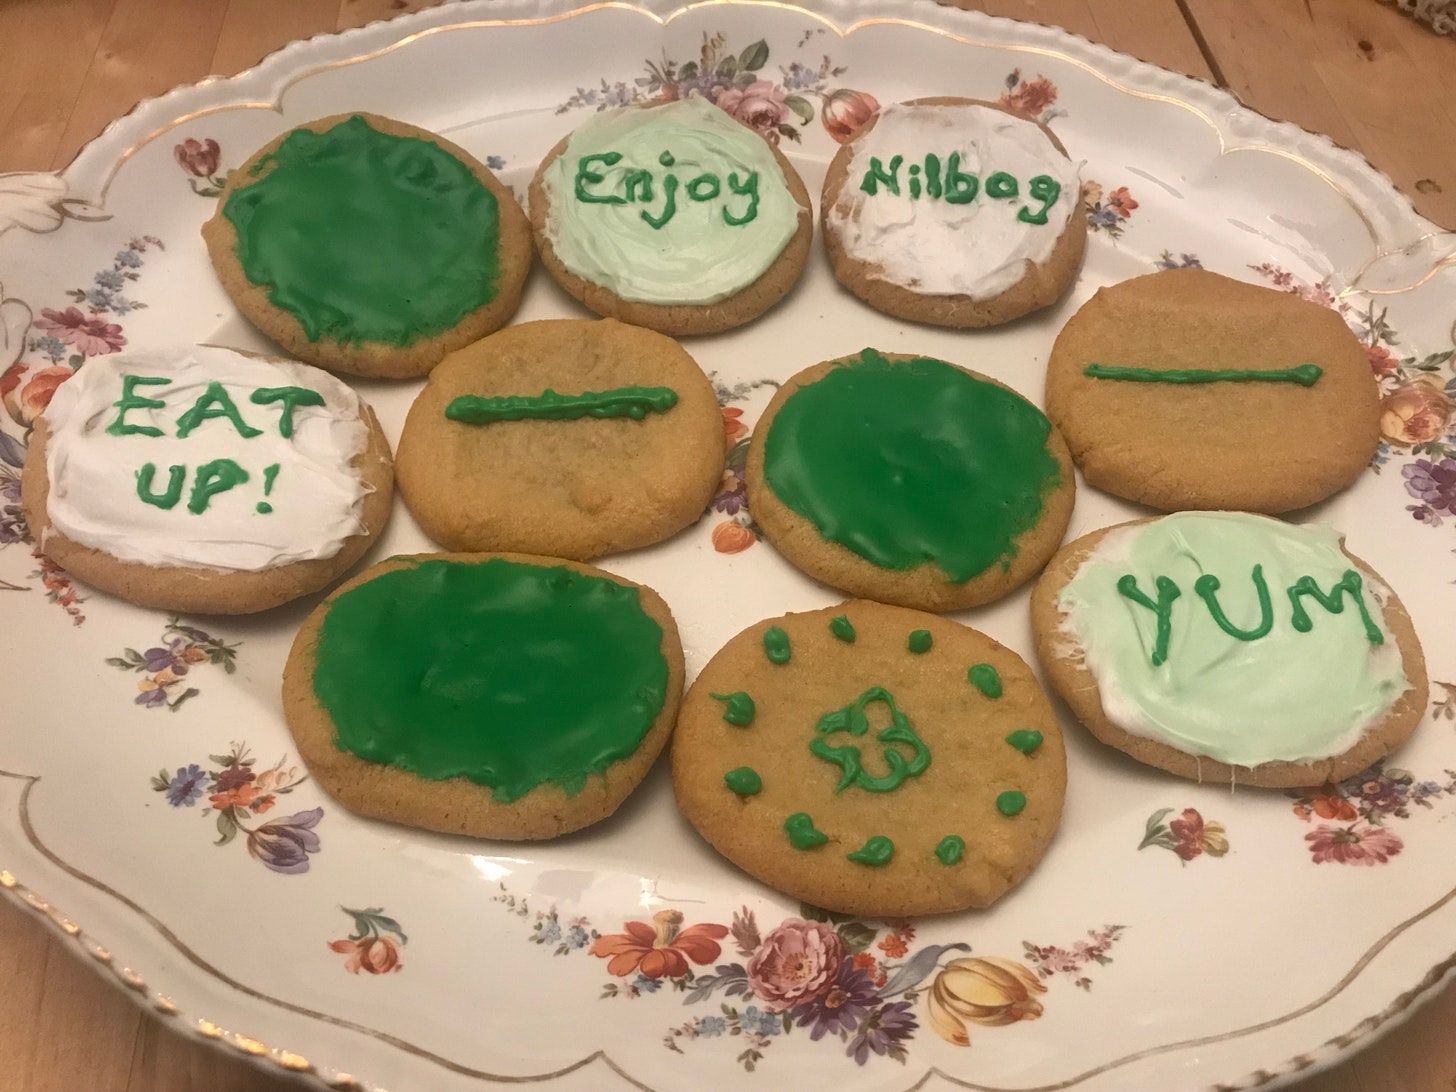 a floral ceramic platter full of cookies decorated with green icing. Some are plain, some have one green line, one has a clover, and four have words: Yum, Enjoy, Nilbog, and Eat Up!